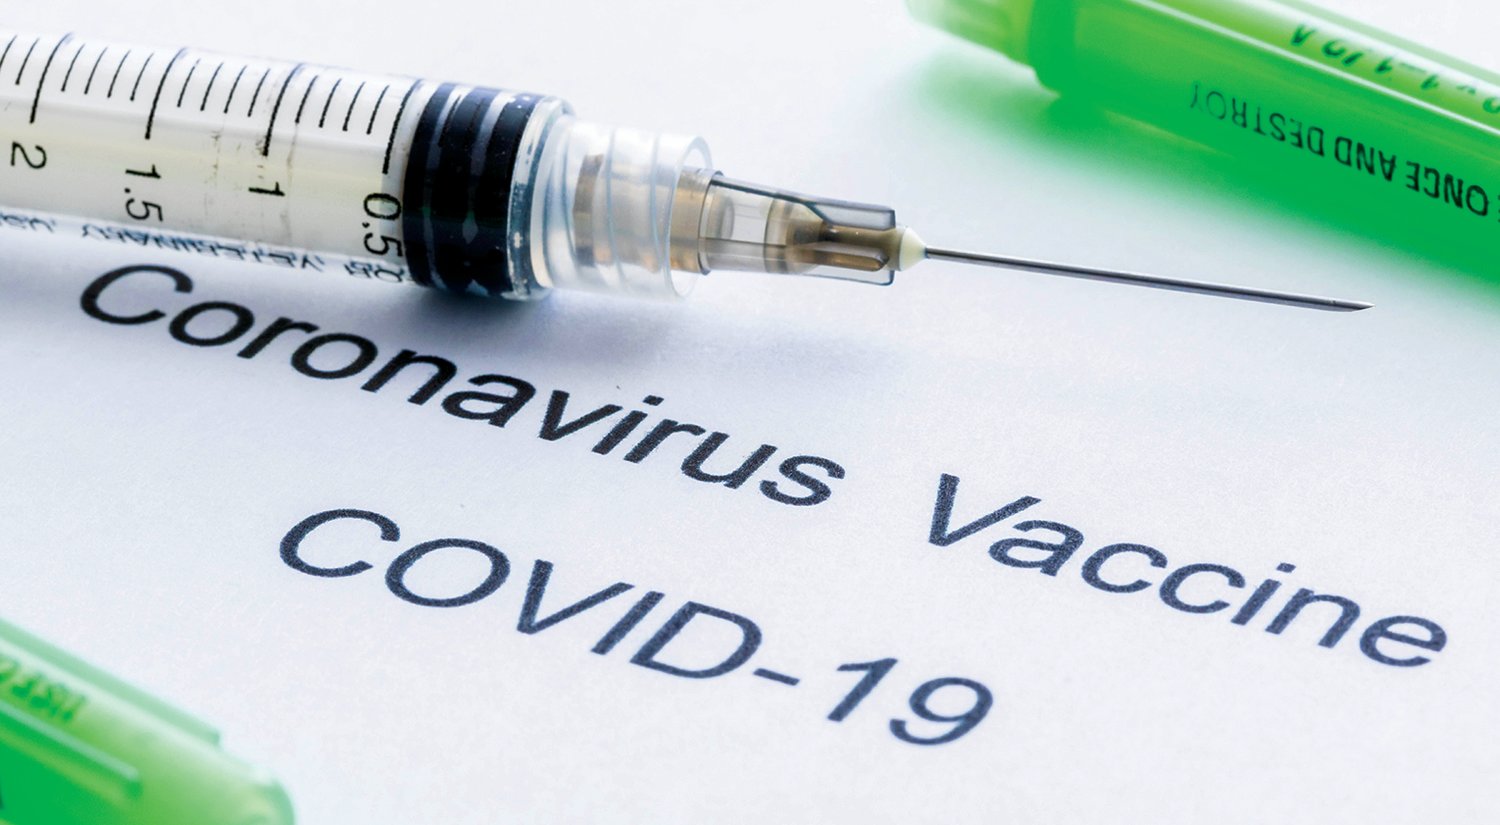 Texas may receive initial coronavirus vaccine doses for 1.4 million people this month, Gov. Greg Abbott says